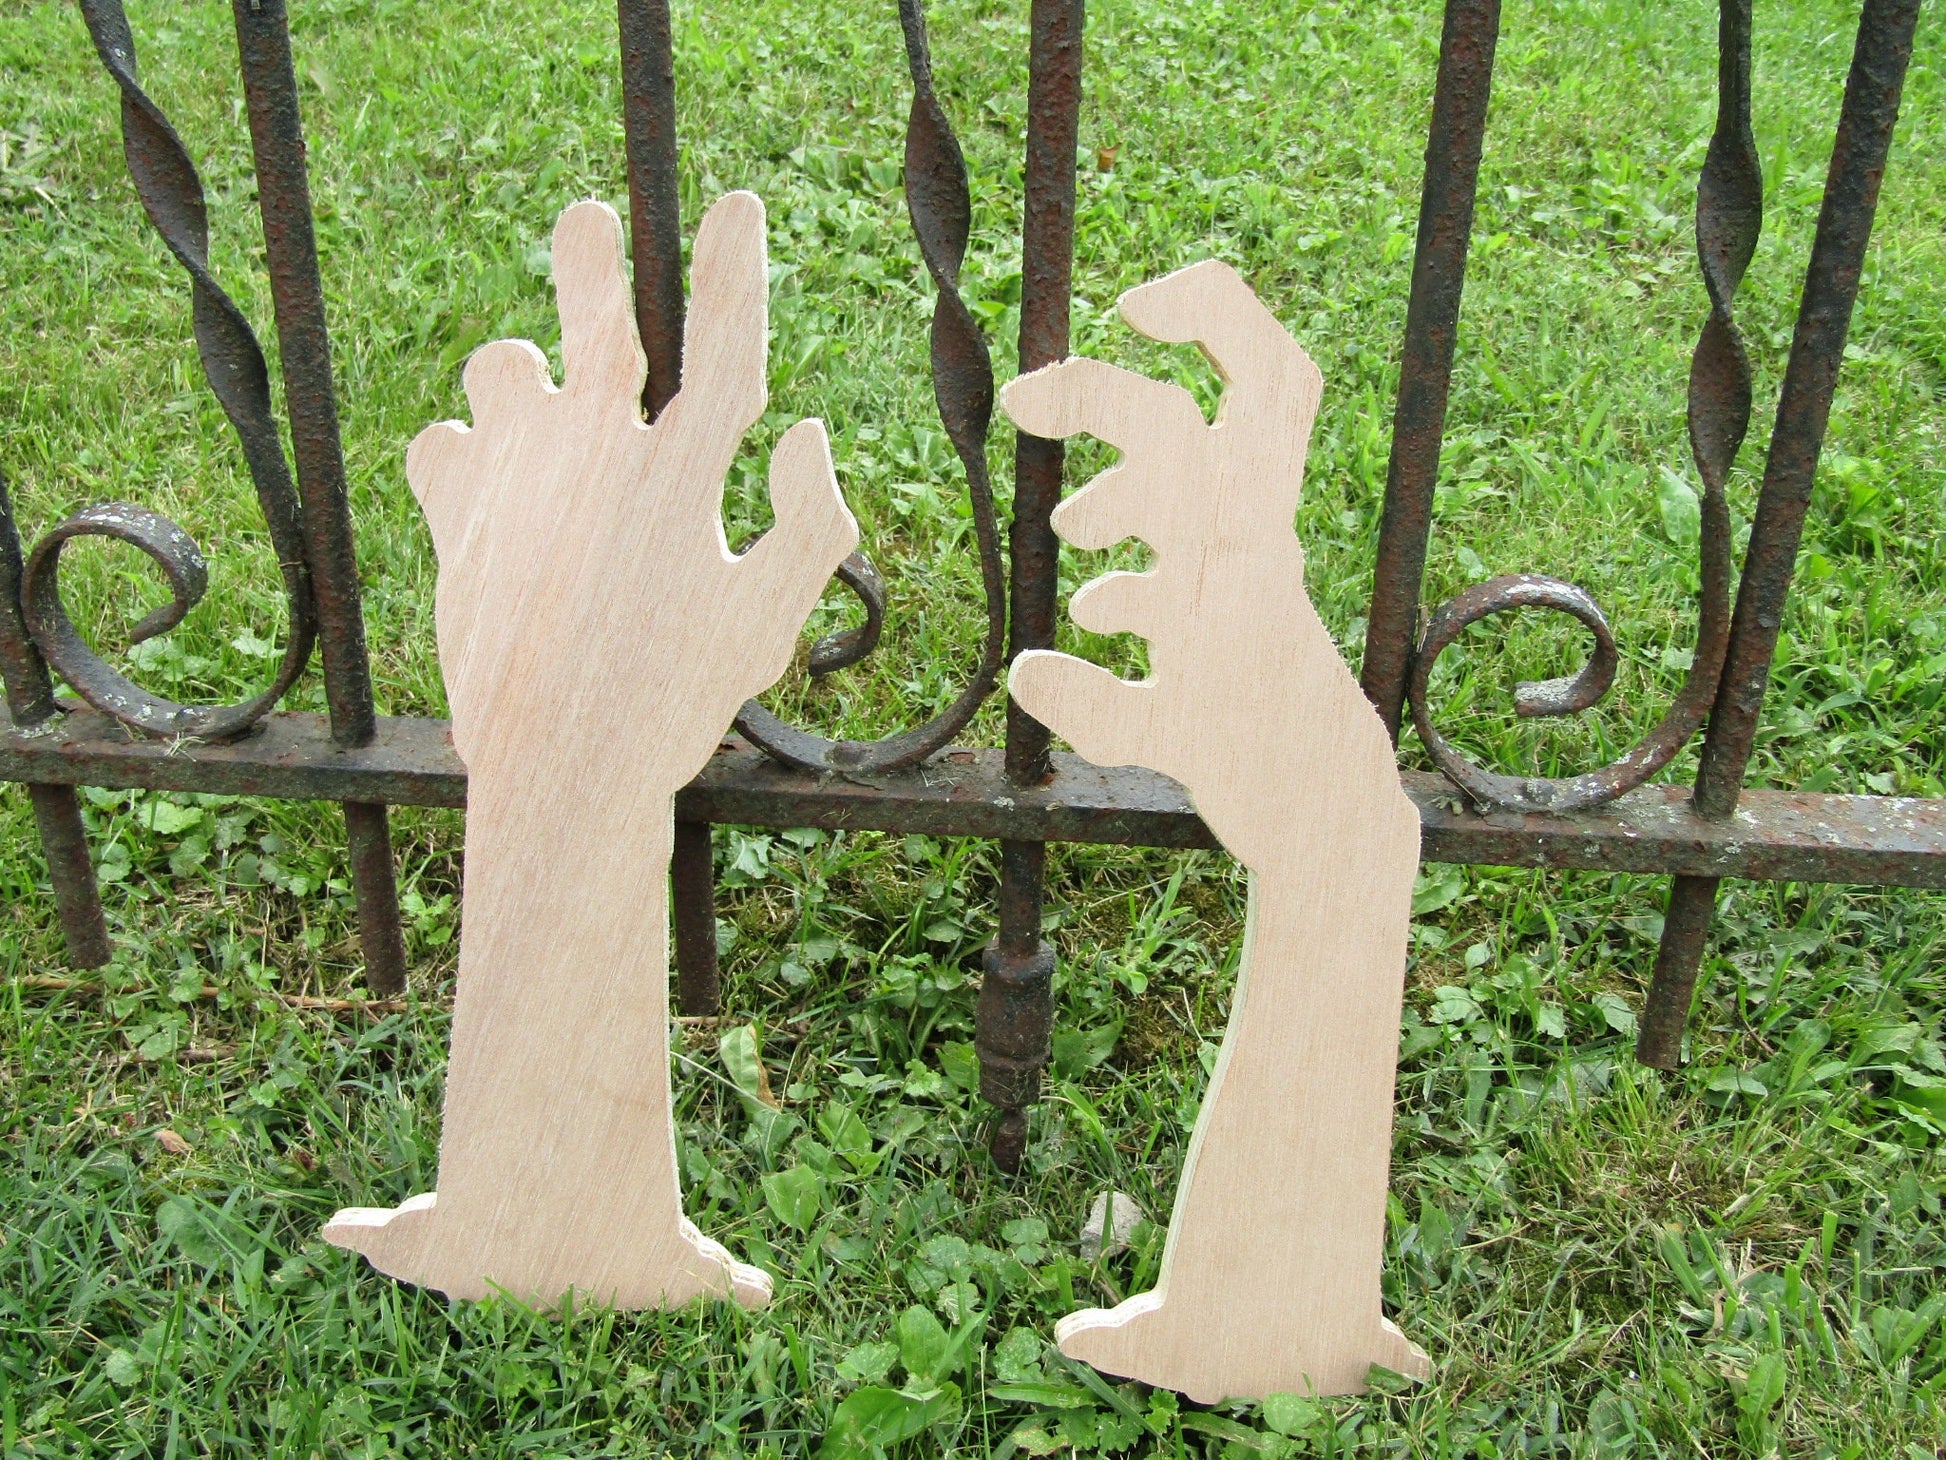 Zombie Hands Lawn Decoration Graveyard Prop Halloween Decor Spooky Scary Haunted House Wooden Laser Cut Silhouette Natural Autumn Dead